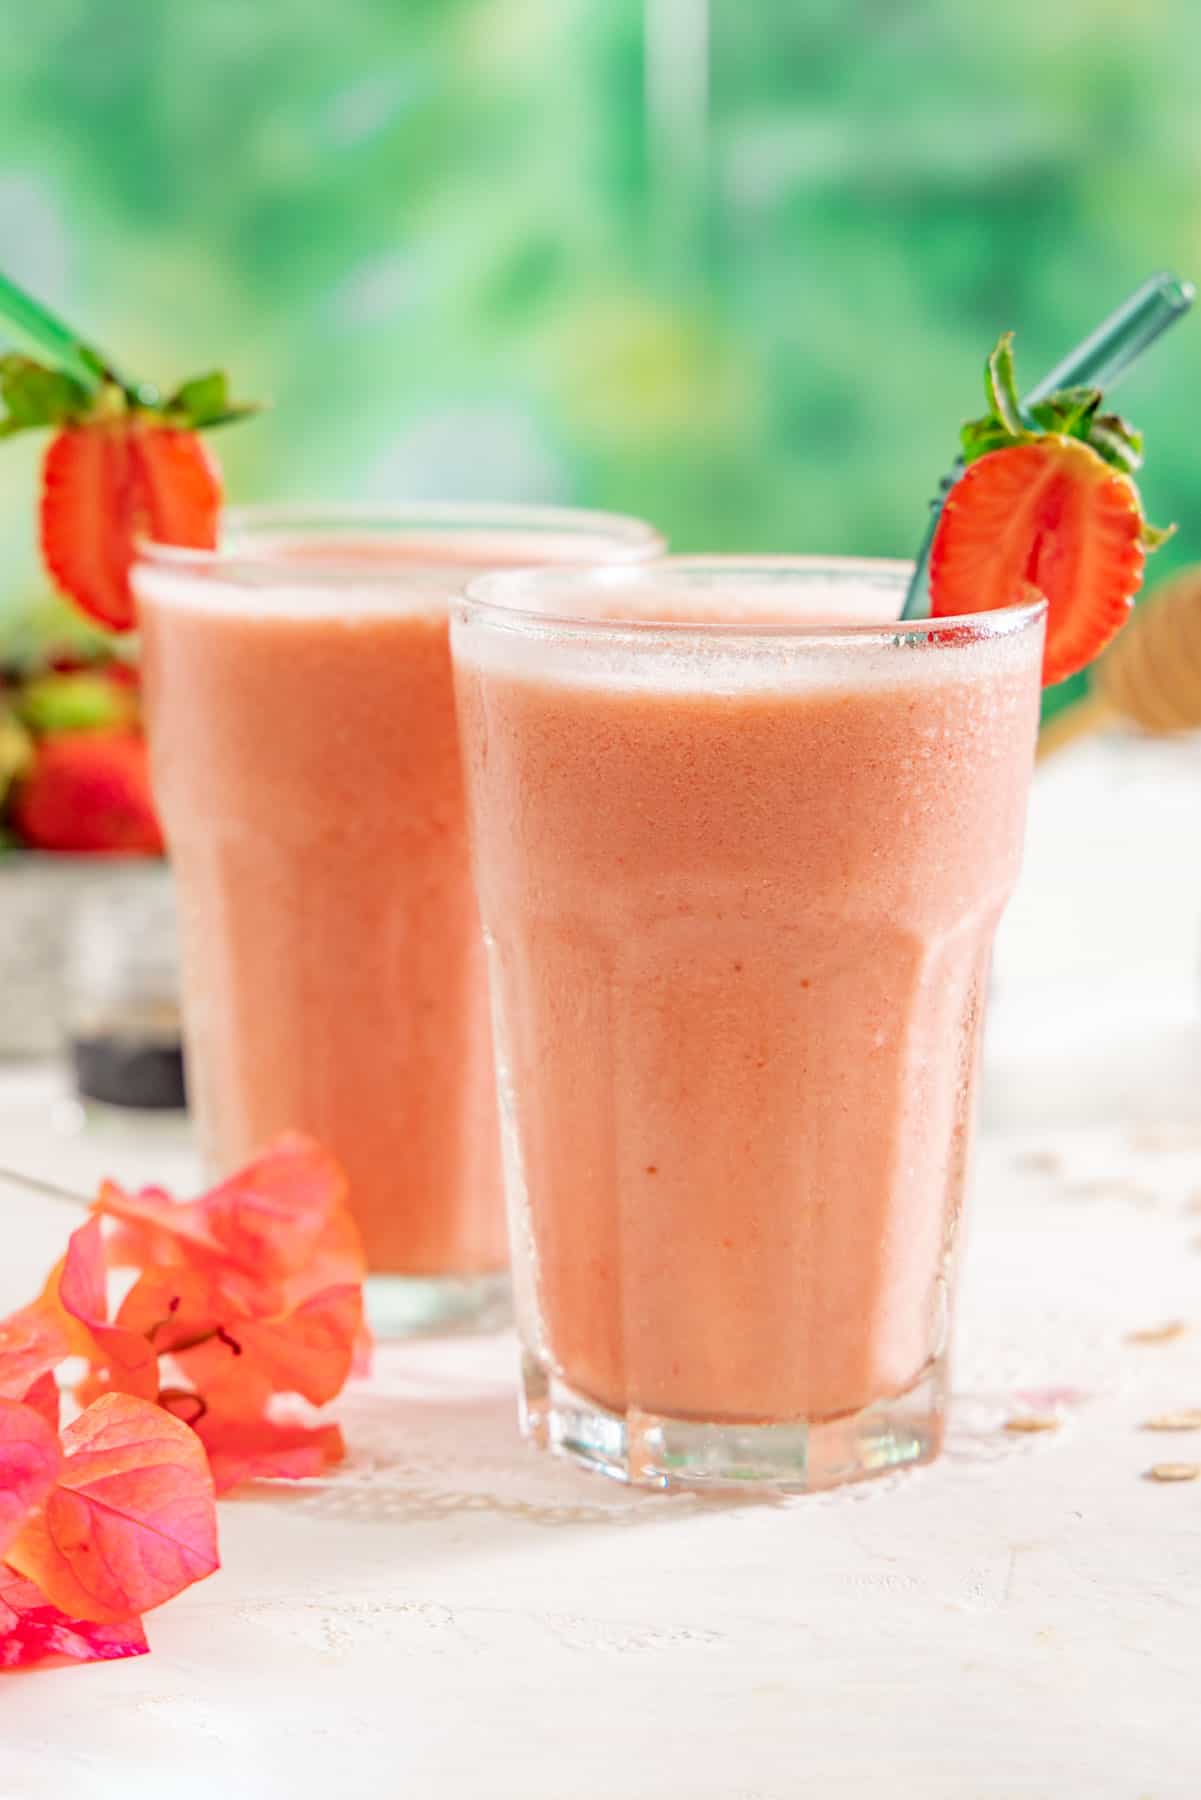 Strawberry oatmeal smoothie.